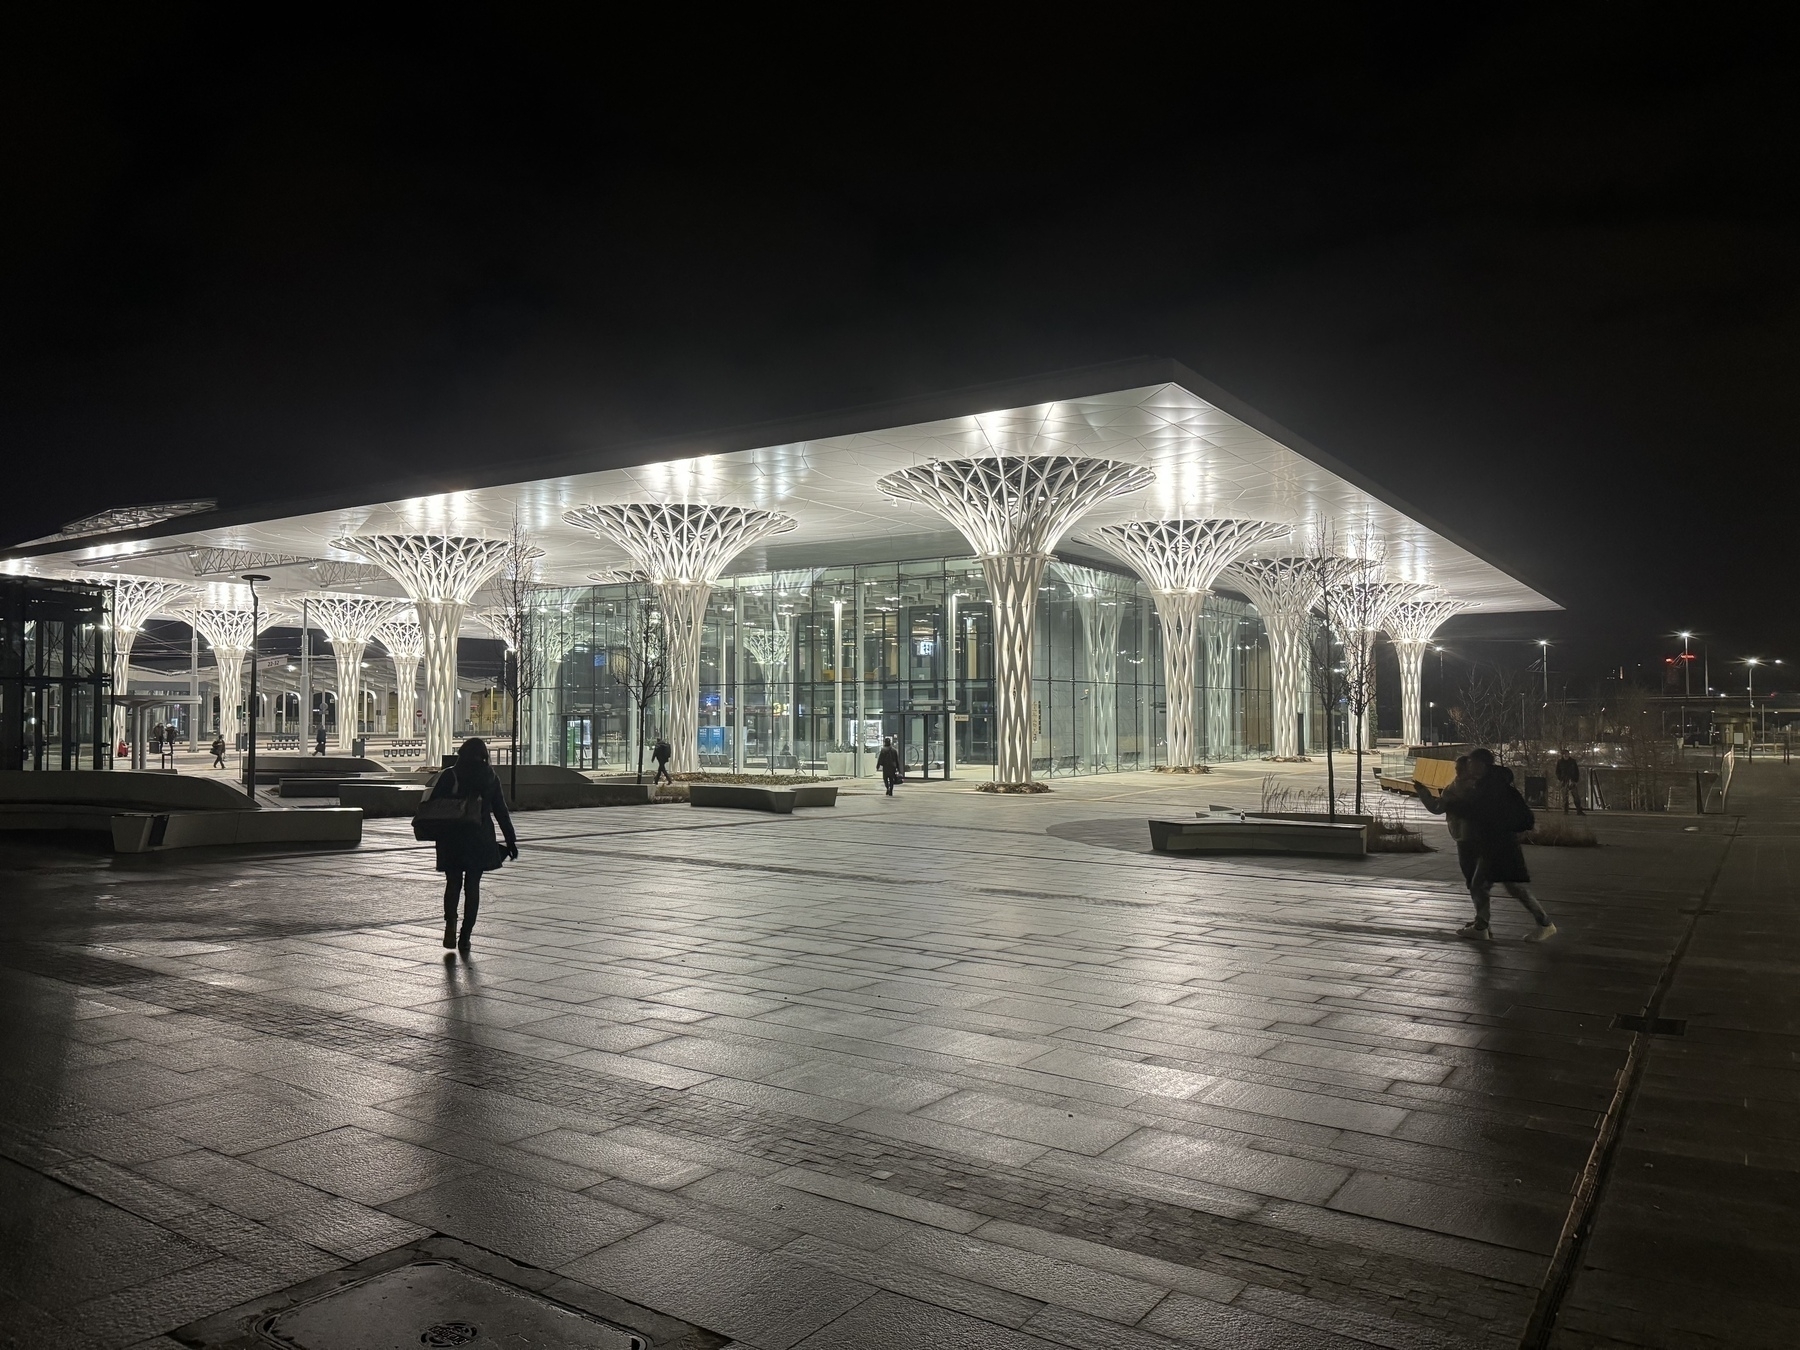 The central Lublin bus station. With pillars that look like tree branches. 